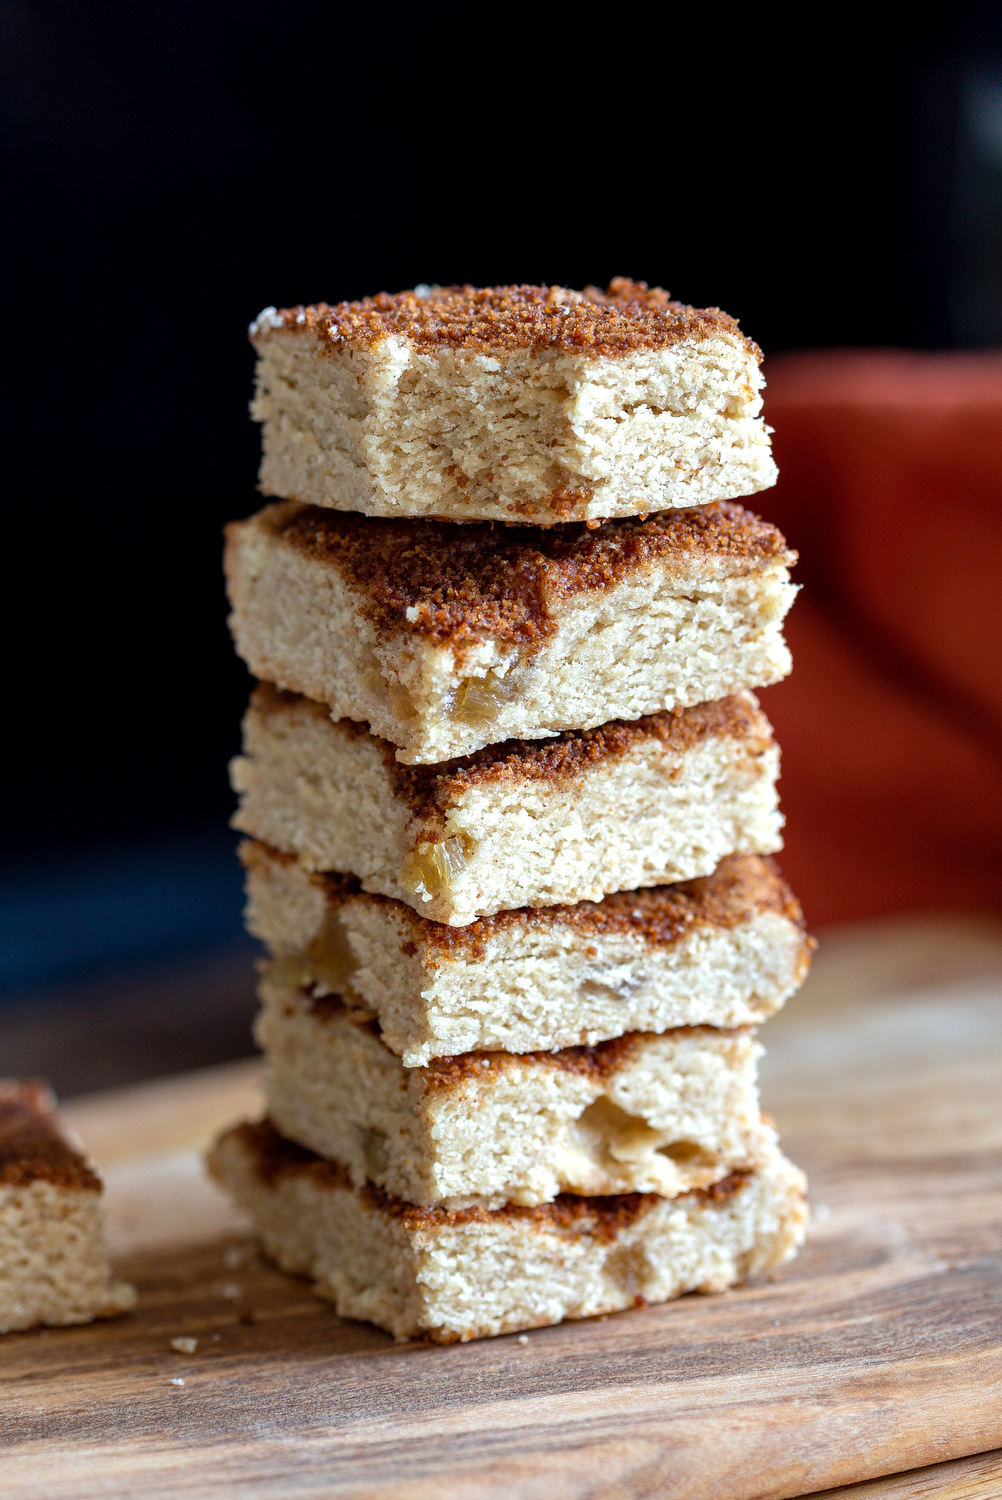 These Vegan Snickerdoodle Bars need 1 Bowl and 30 mins. Easy Snickerdoodle cookie bars short bread like, cinnamony and delicious. Glutenfree option.  #vegan #recipe #snickerdoodlebars #veganRicha